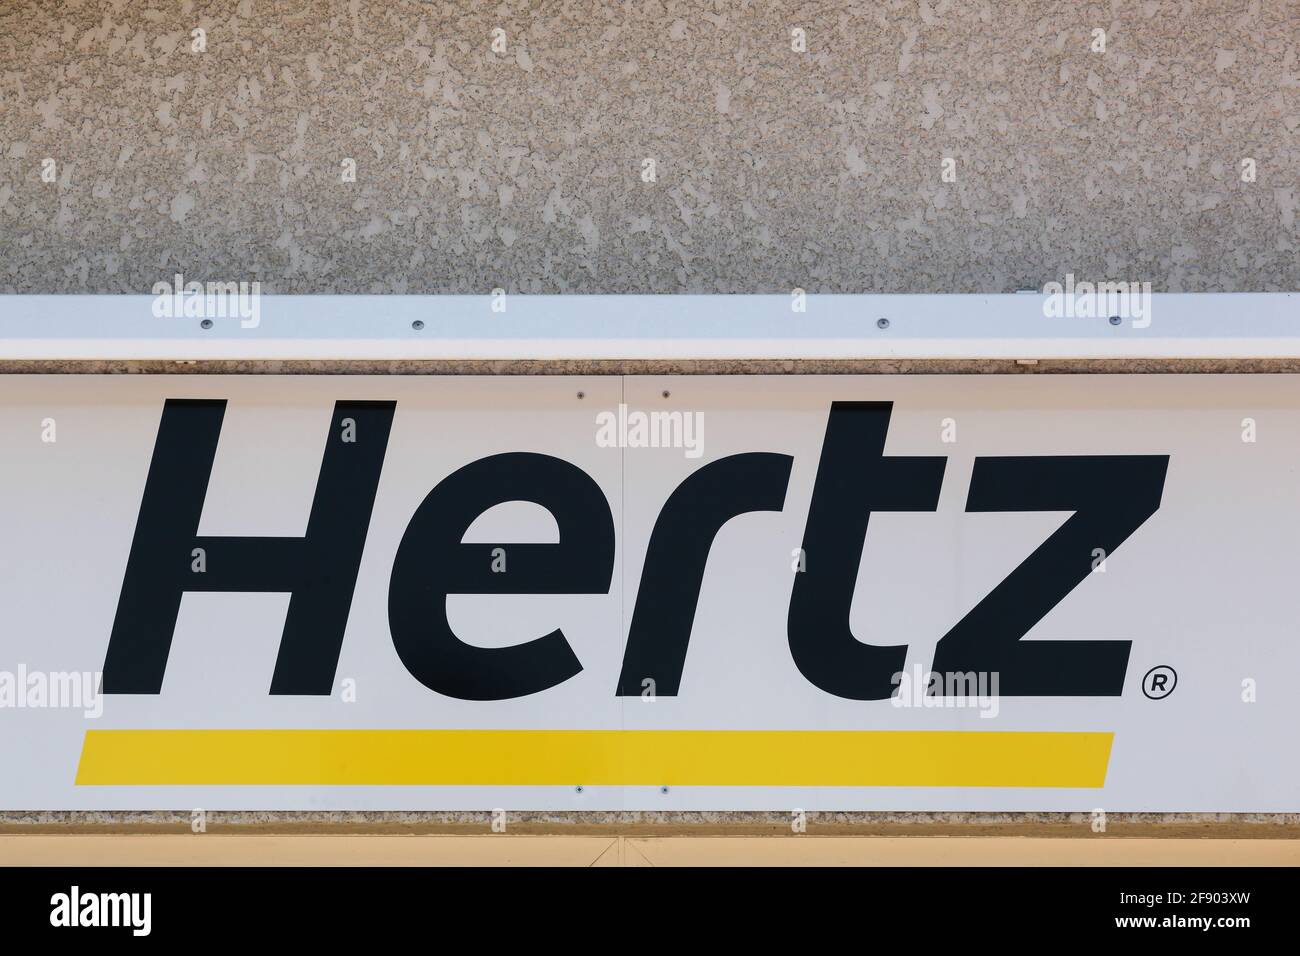 Roanne, France - May 31, 2020: Hertz logo on a wall. Hertz is an American car rental company with international locations in 145 countries worldwide Stock Photo